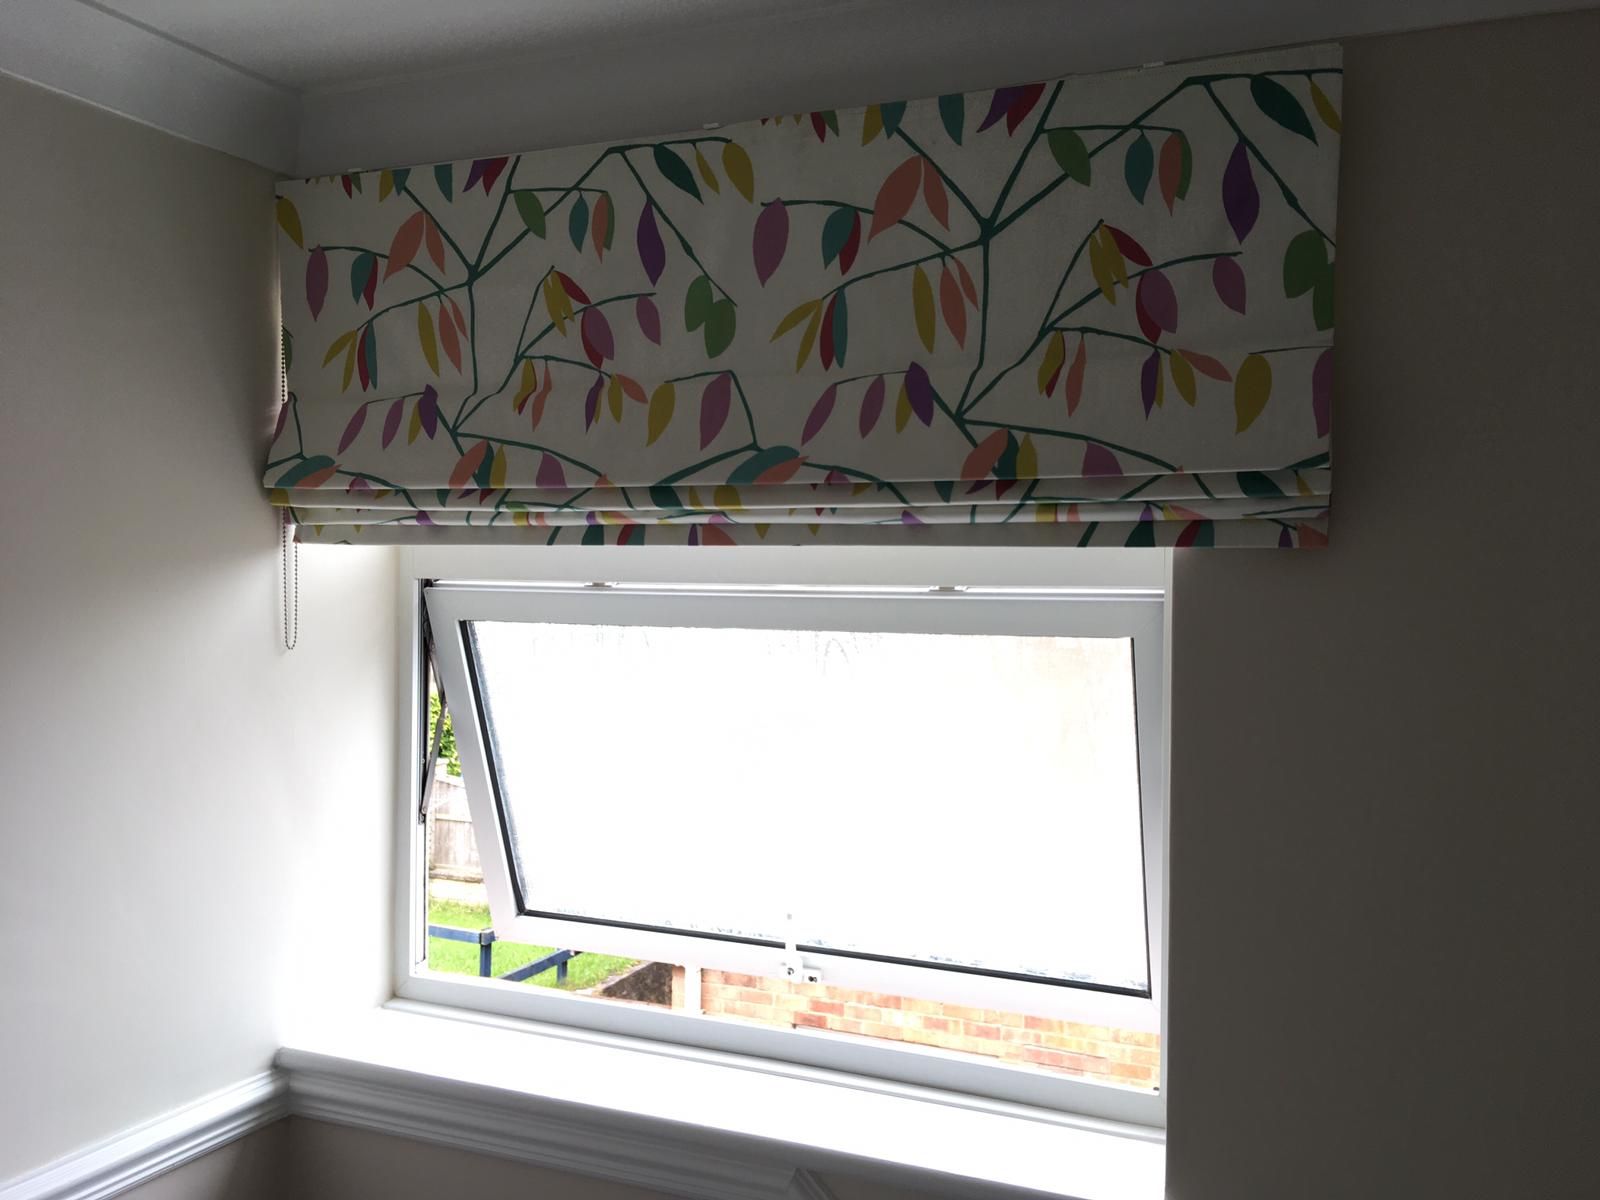 Suppliers of Roman Blinds With No Stitch Holes Option